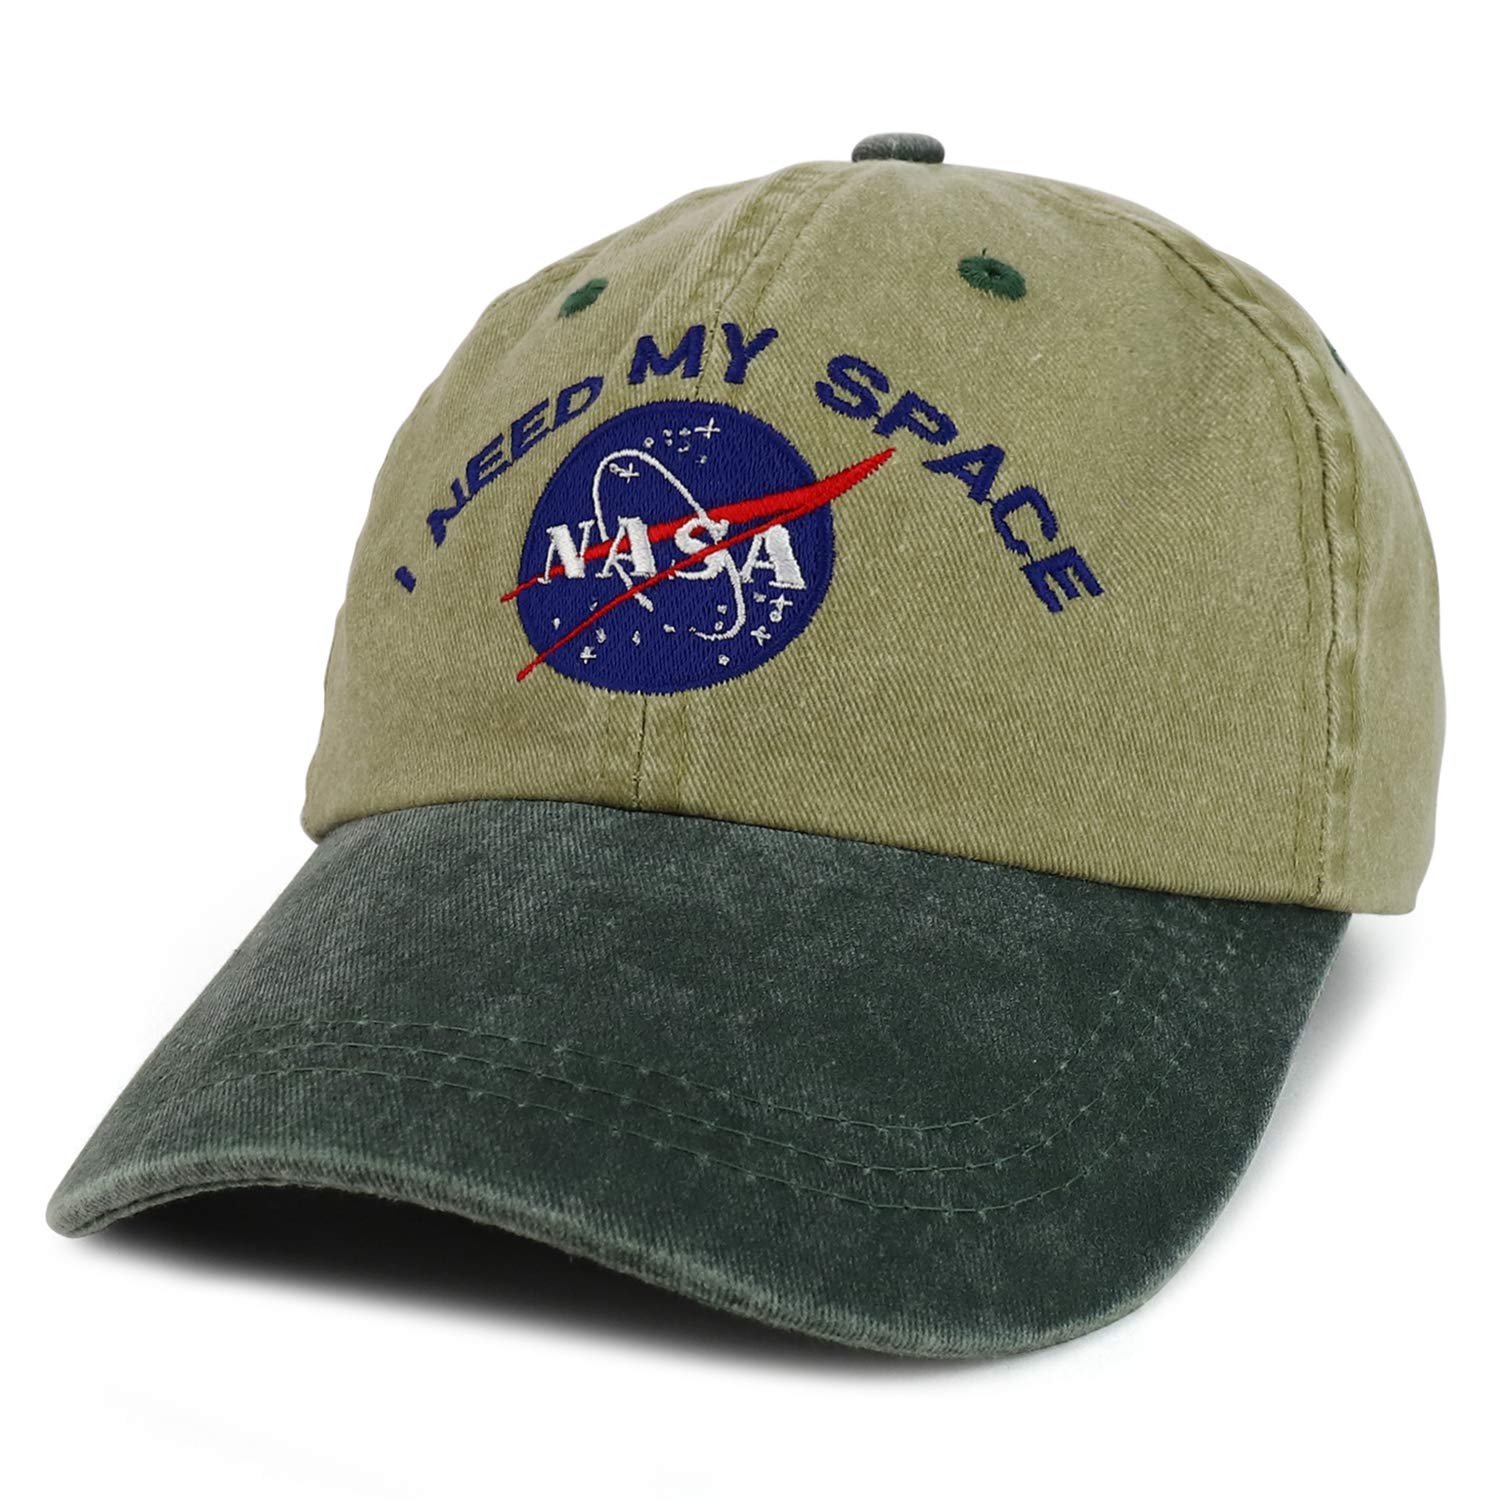 NASA I Need My Space Embroidered Two Tone Pigment Dyed Cotton Cap - Beige Black